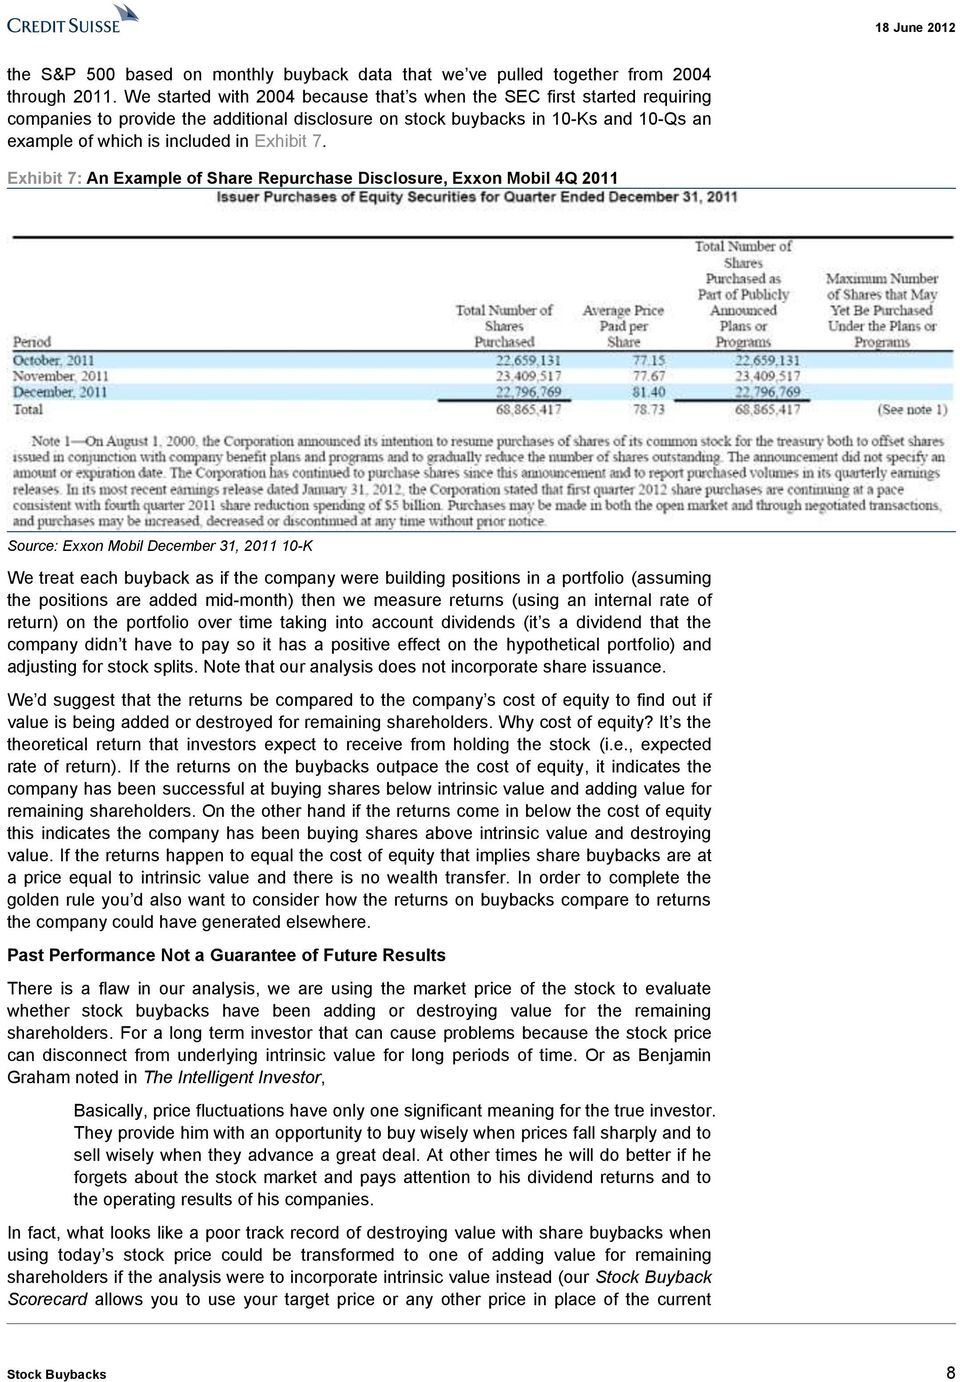 7. Exhibit 7: An Example of Share Repurchase Disclosure, Exxon Mobil 4Q 2011 Source: Exxon Mobil December 31, 2011 10-K We treat each buyback as if the company were building positions in a portfolio